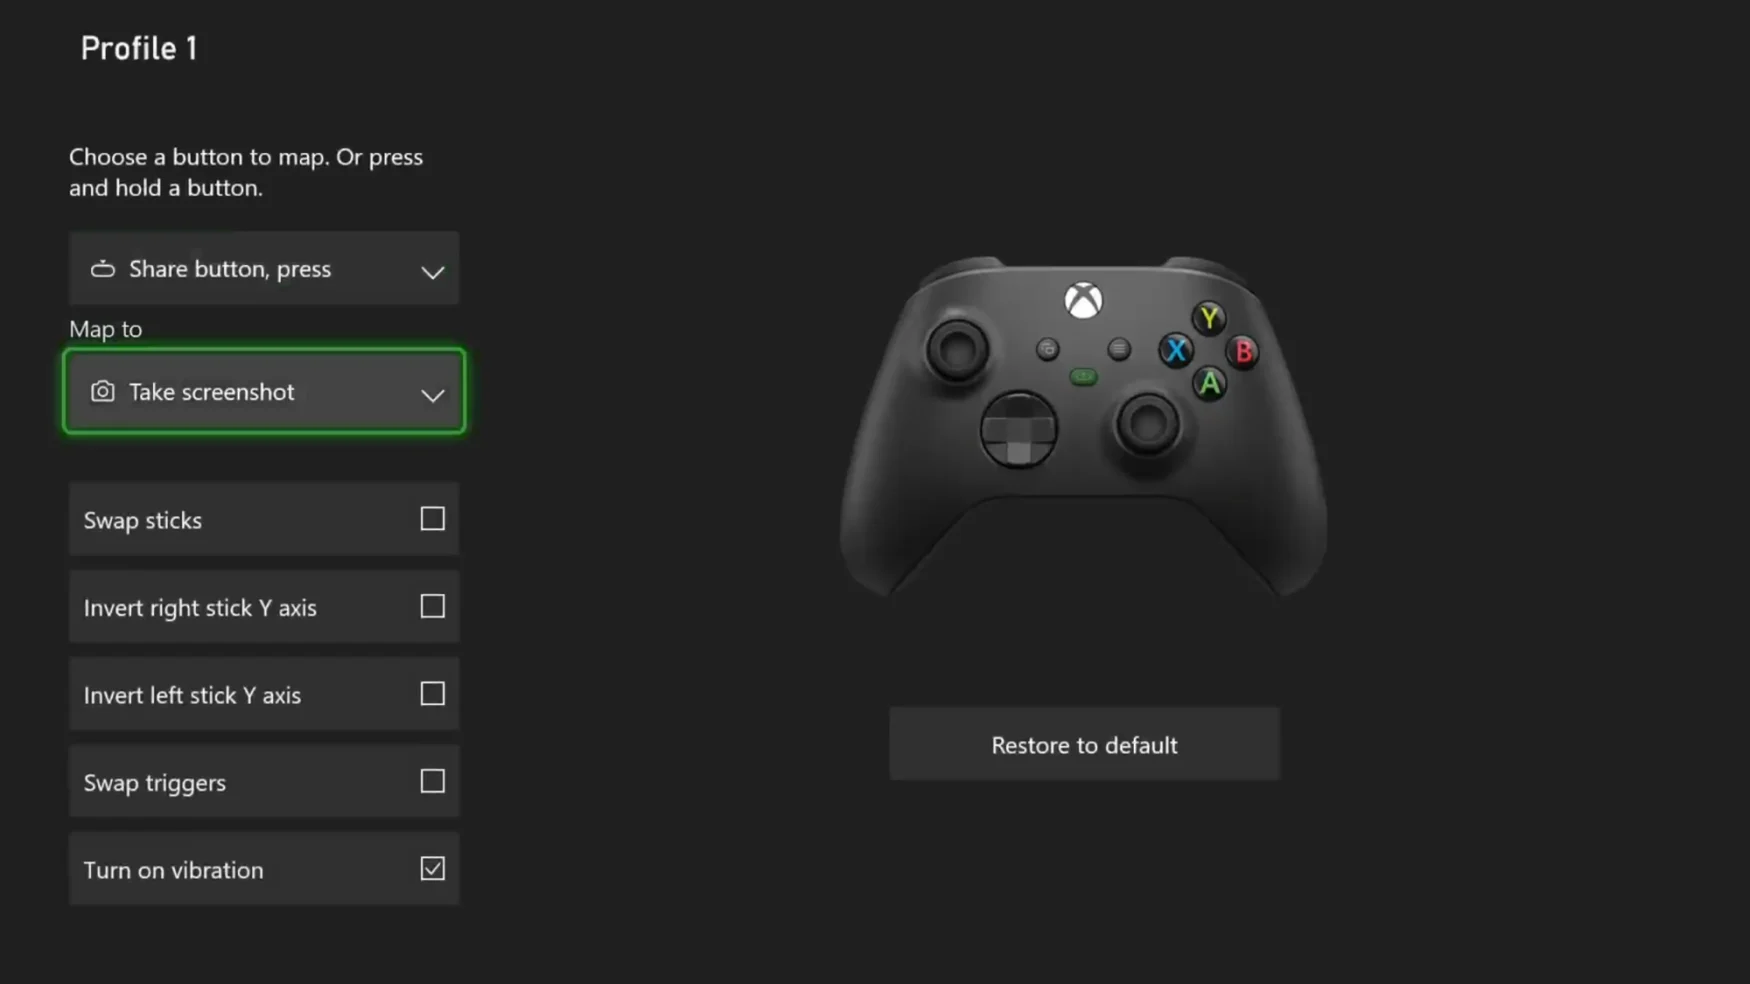 A screenshot of the Button mapping menu on an Xbox Series X/S.